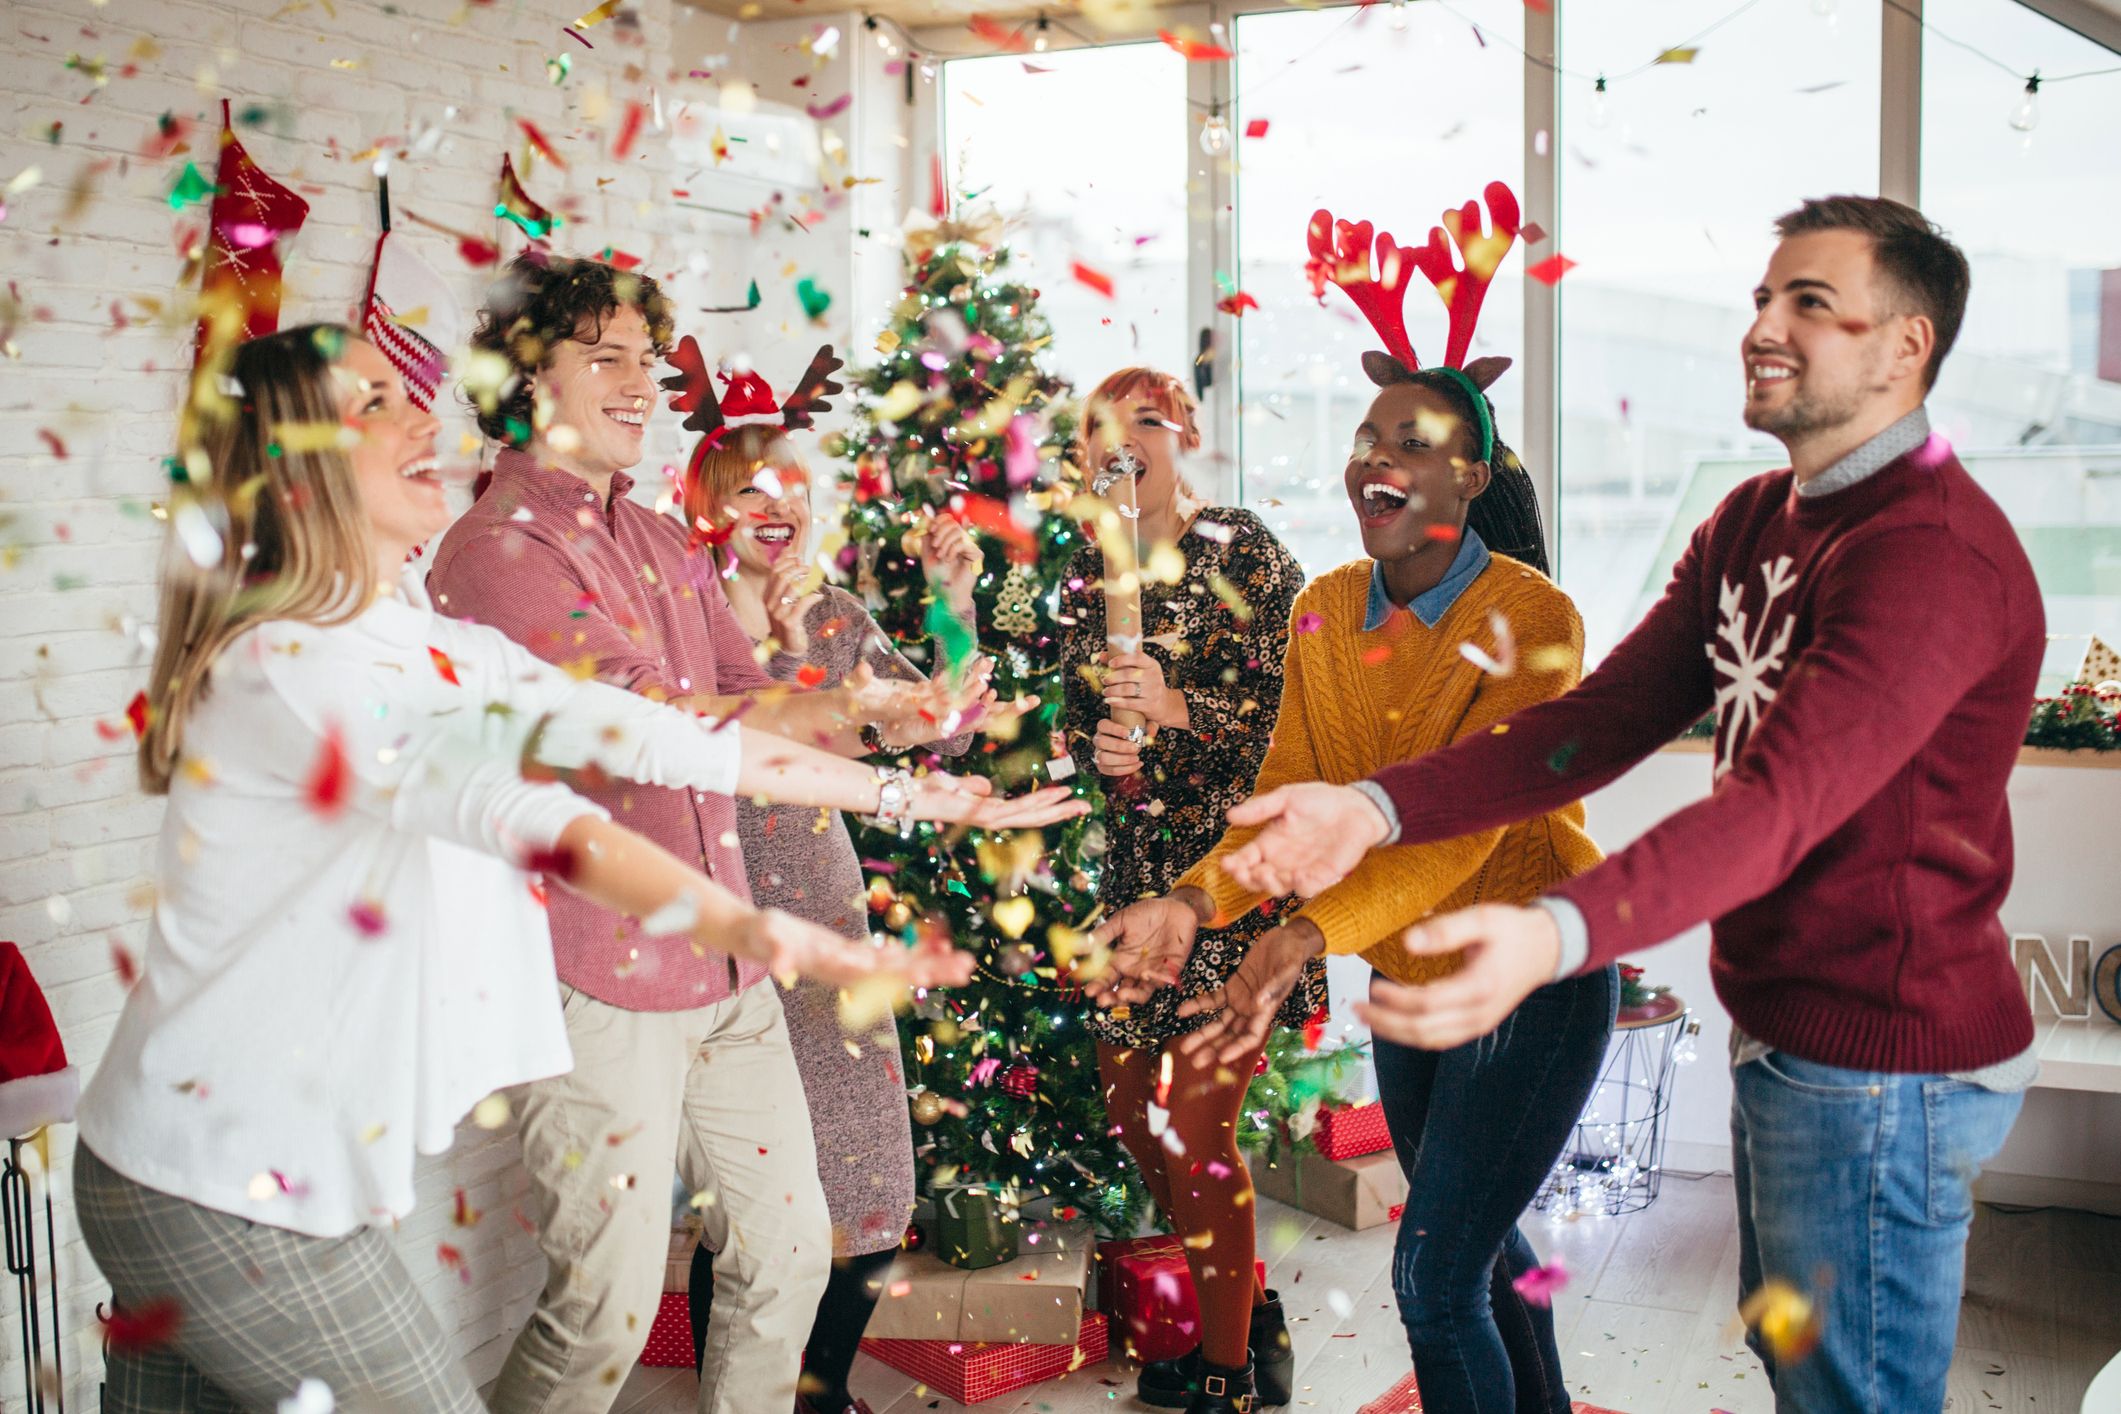 40 Best Christmas Party Themes 2021 - Ideas for a Holiday Party